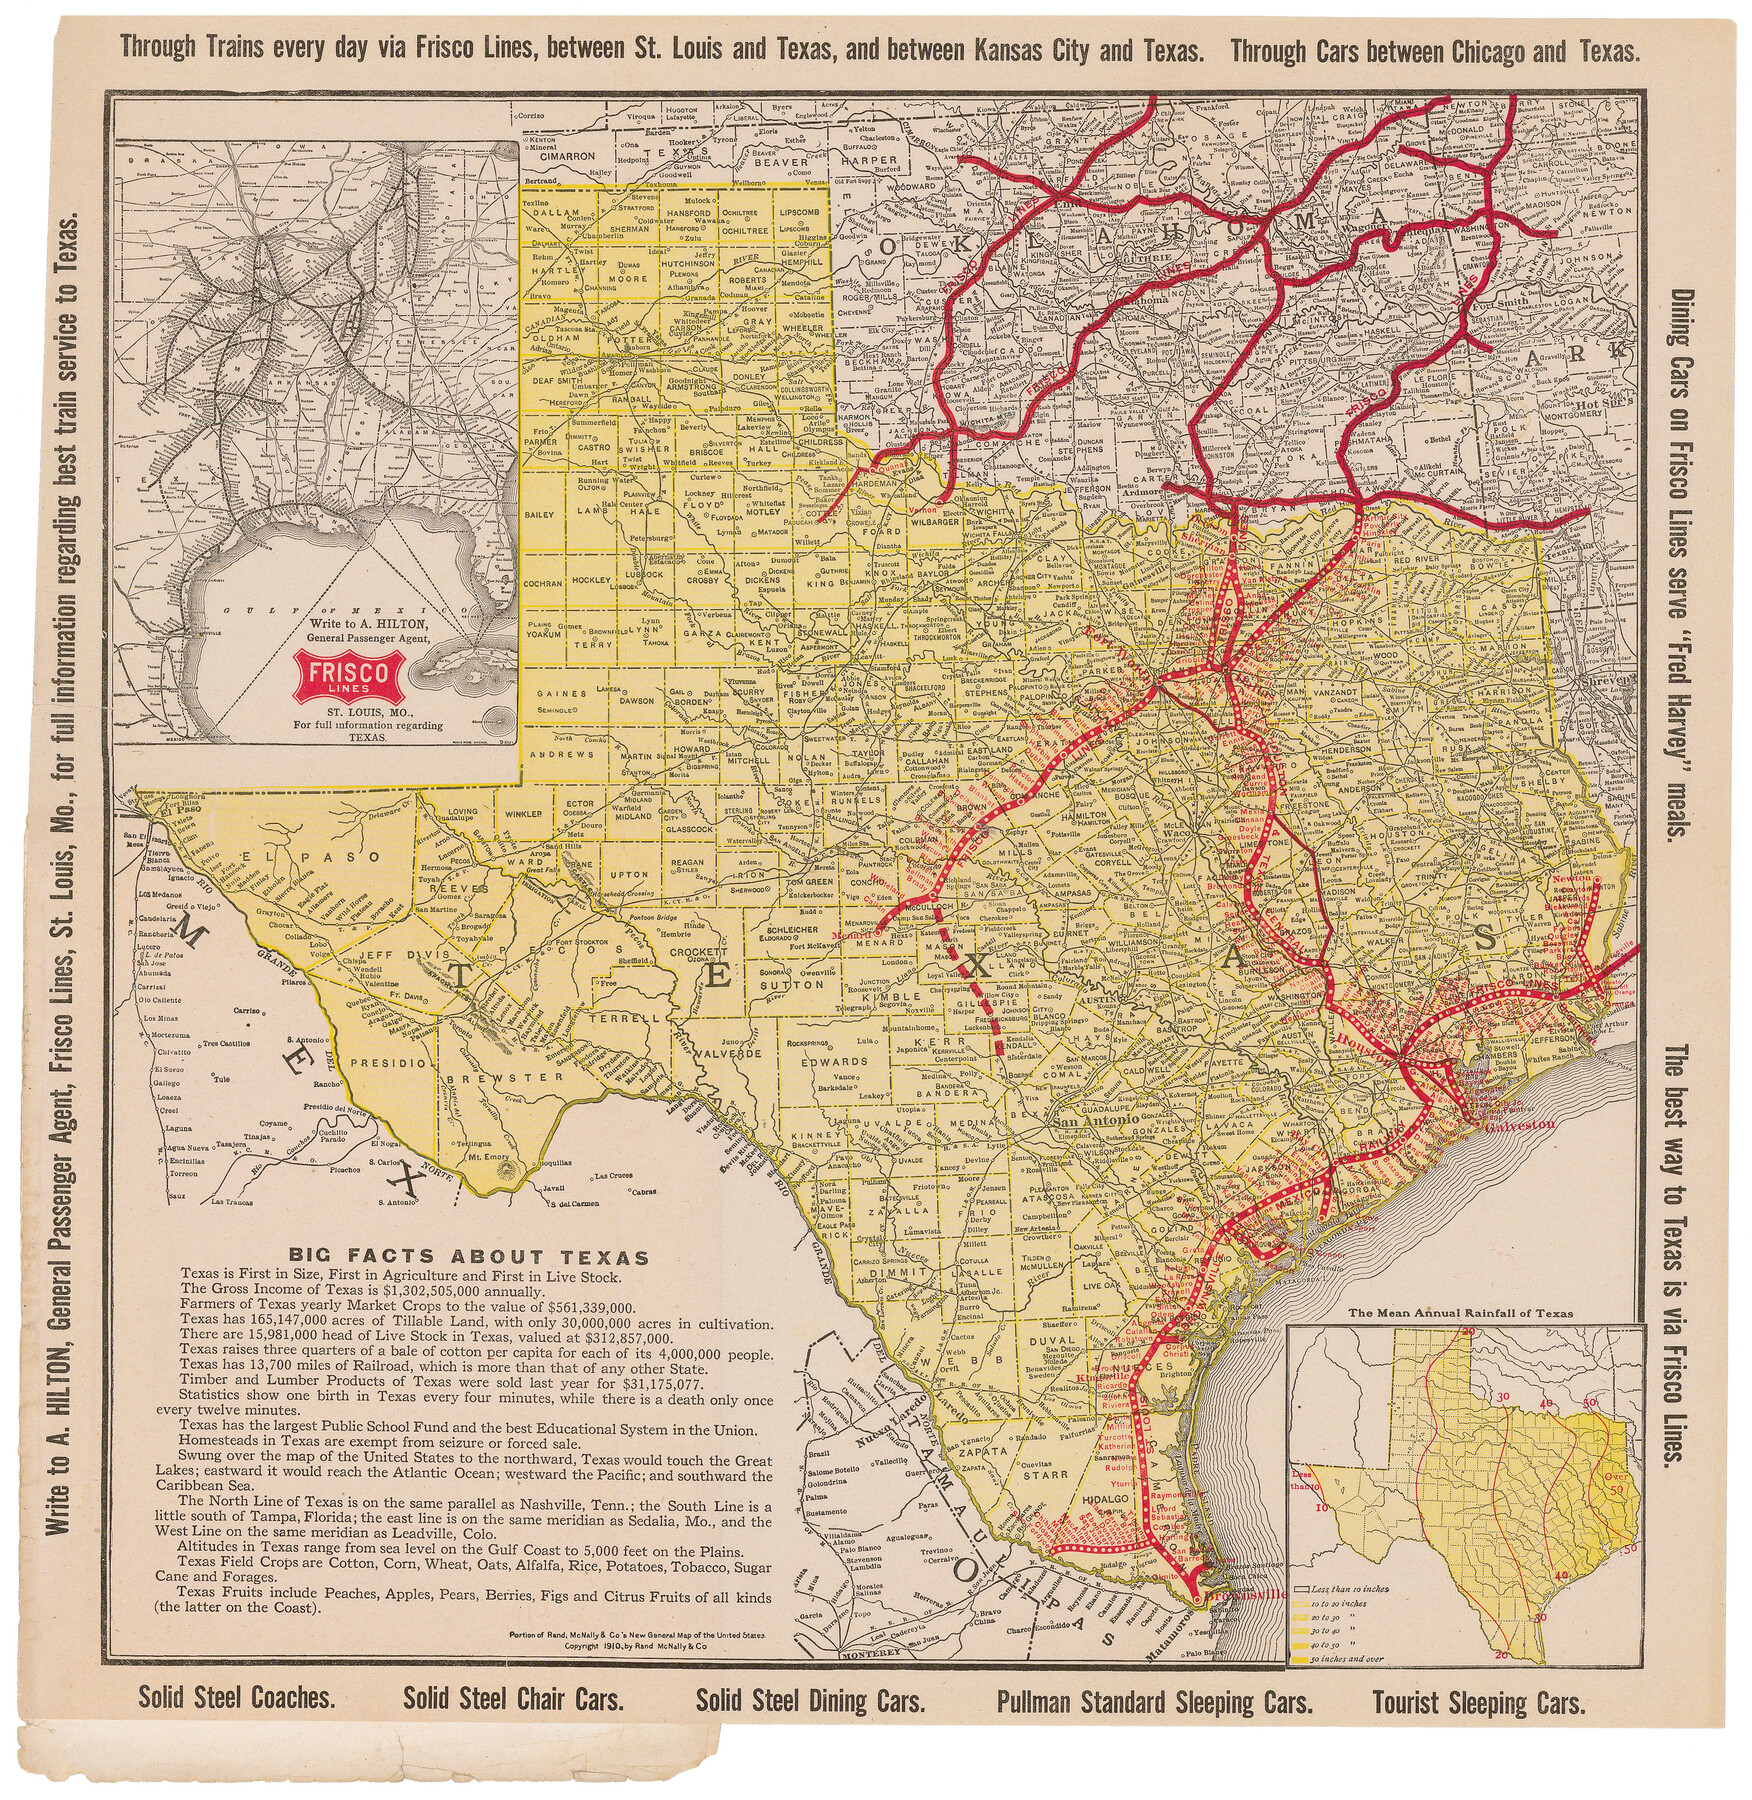 95796, [Map of Texas showing Frisco Lines], Cobb Digital Map Collection